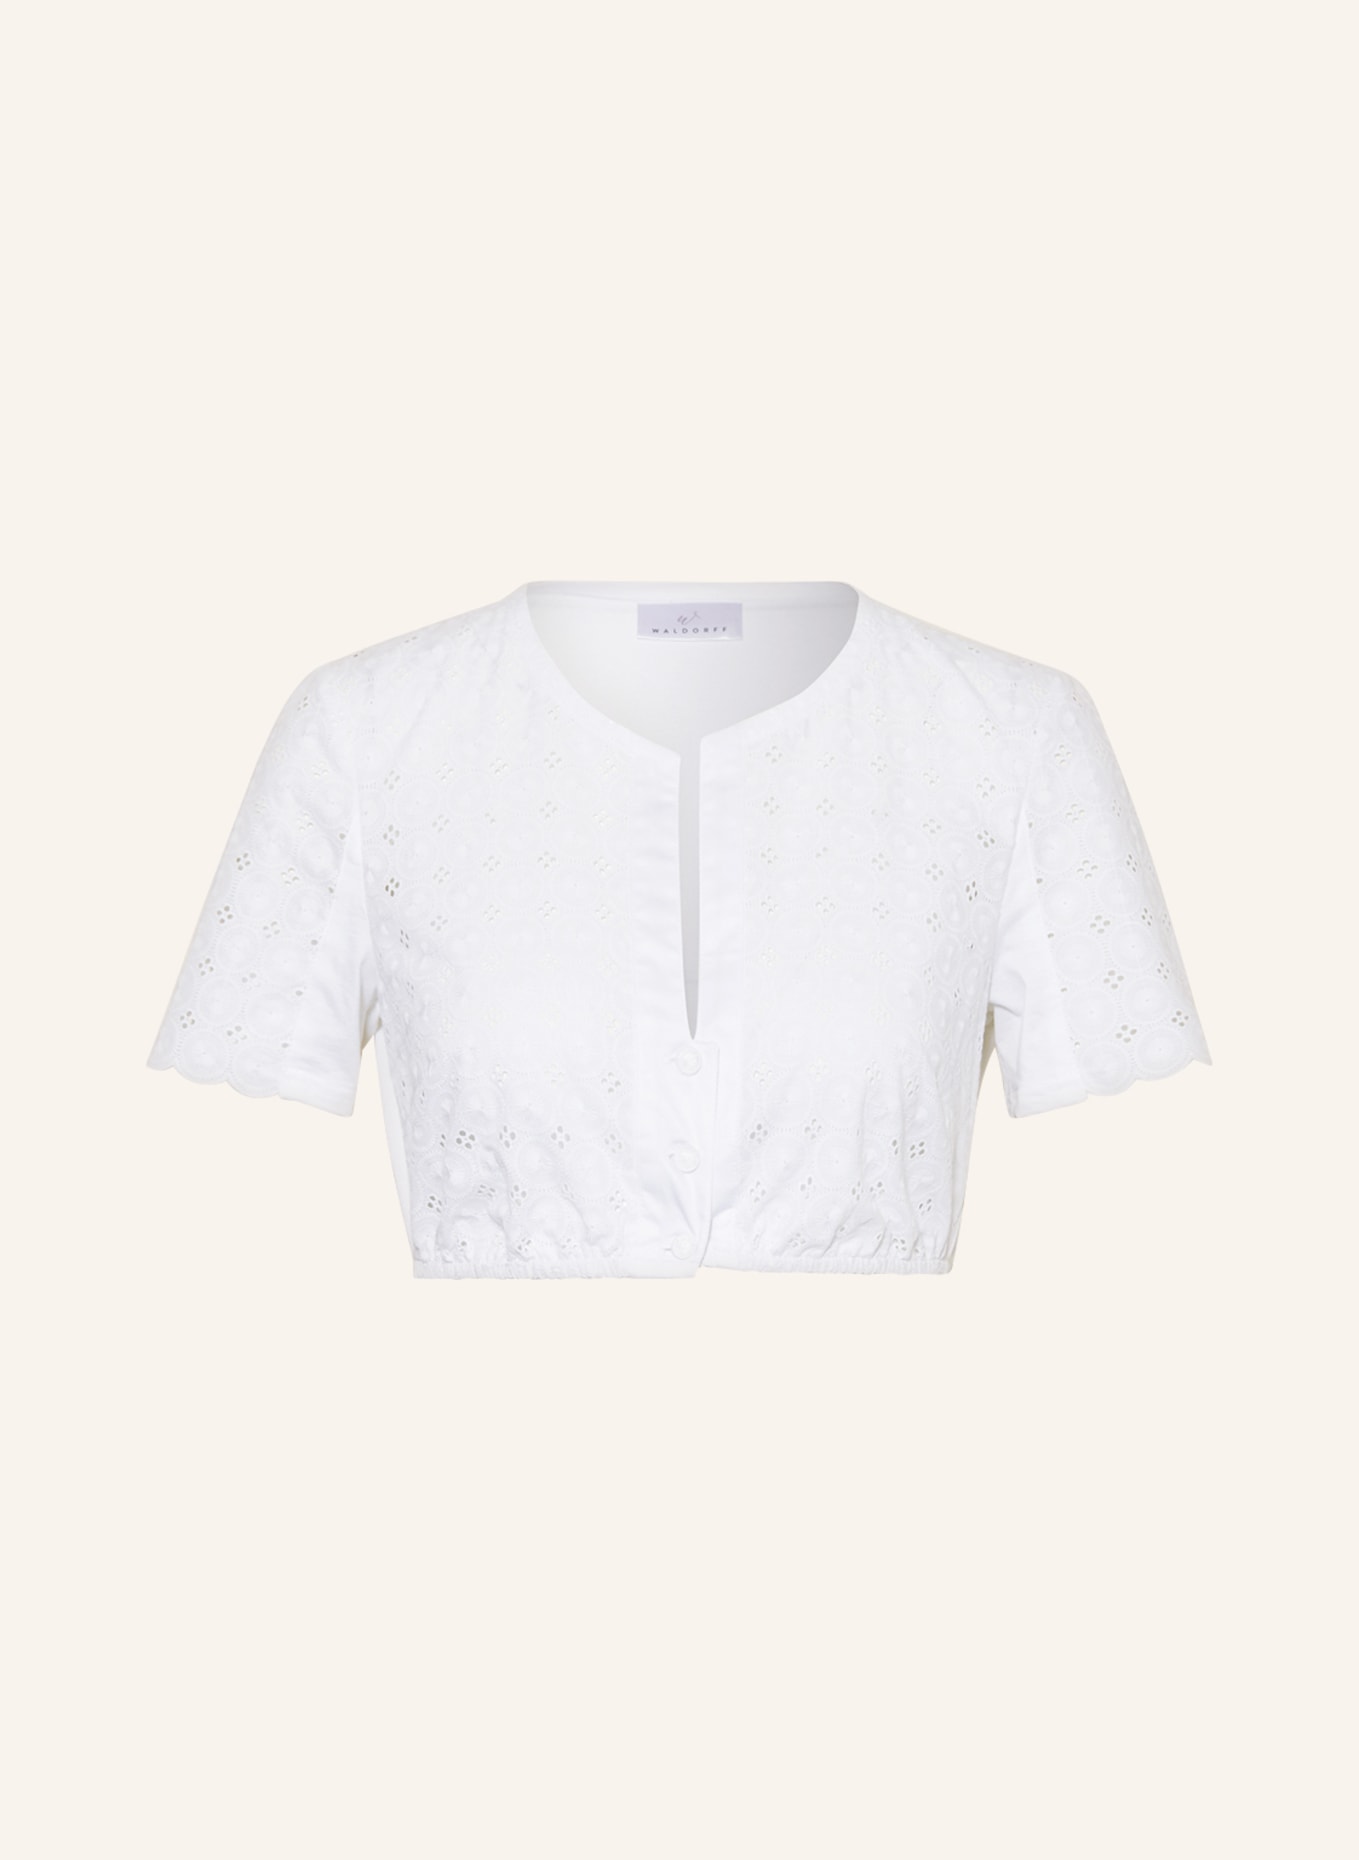 WALDORFF Dirndl blouse with lace, Color: WHITE (Image 1)